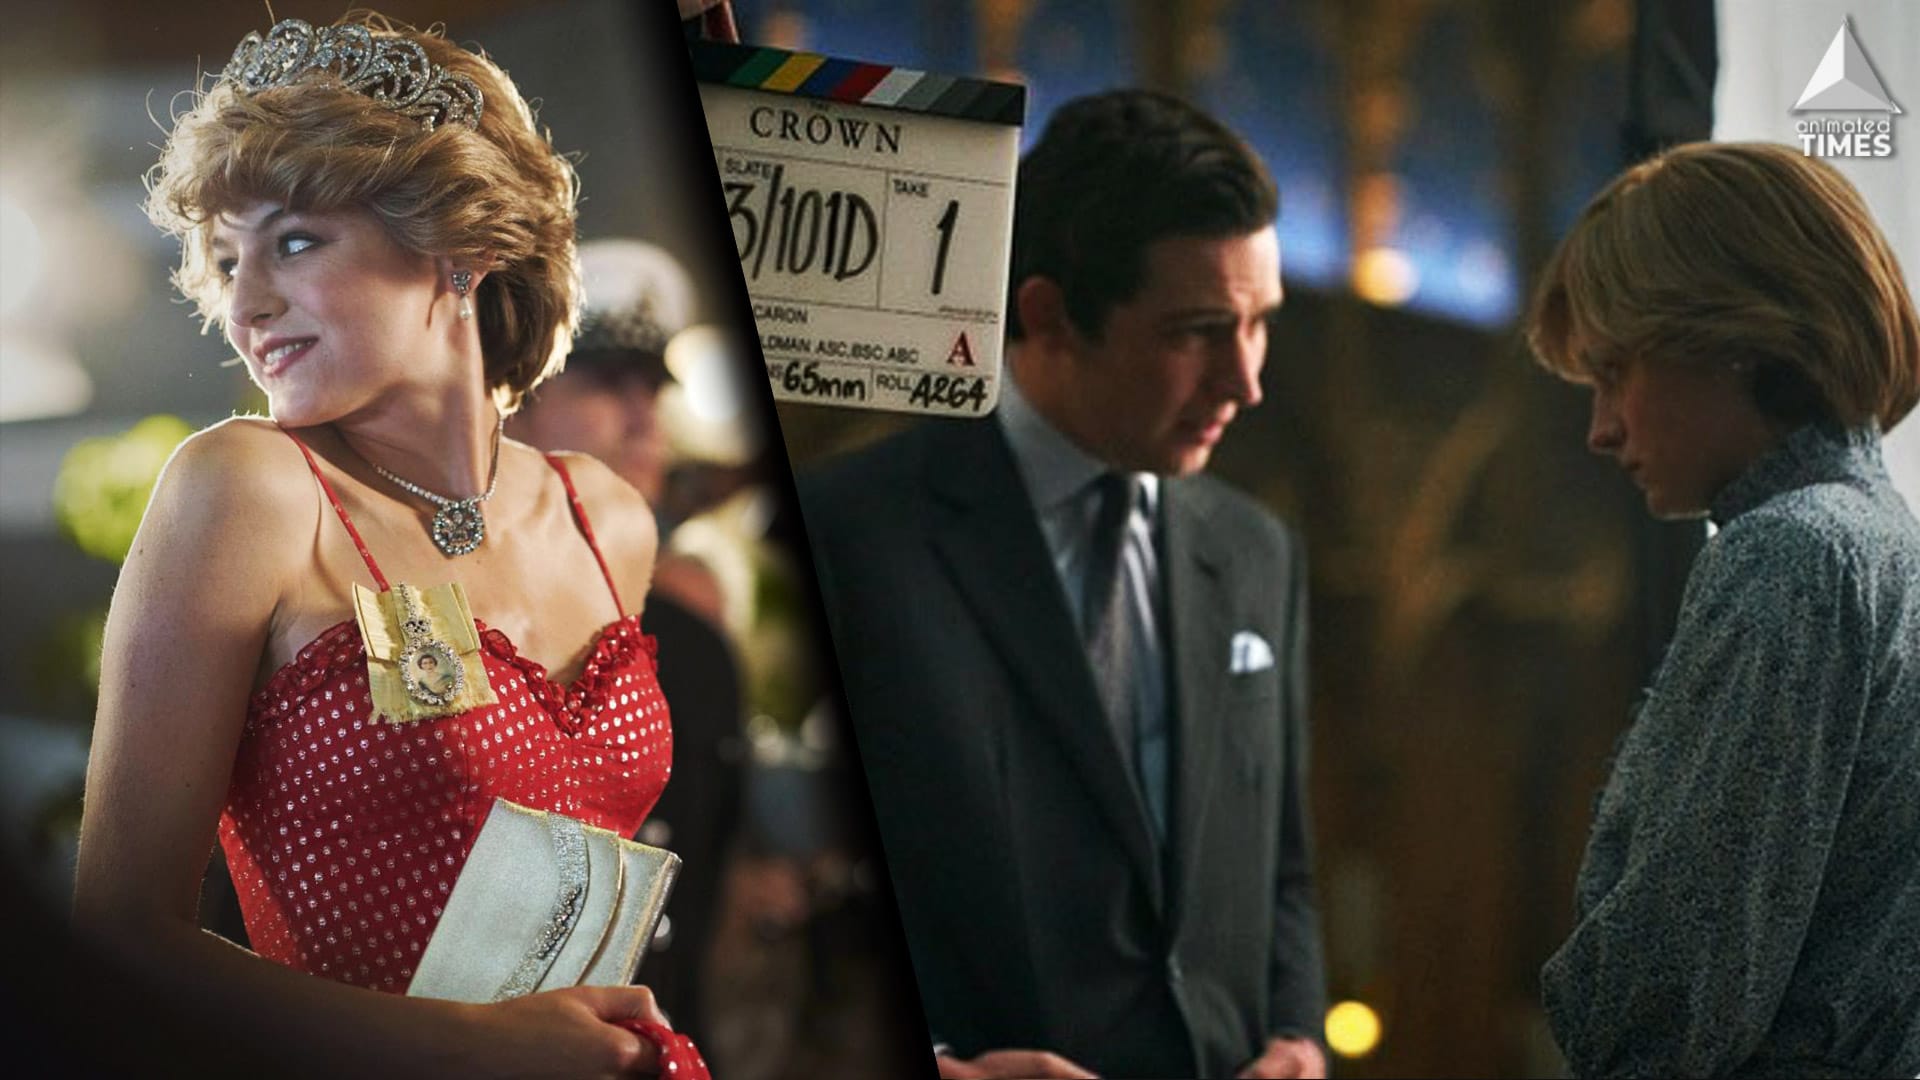 10 BTS Pics From The Show “The Crown”That Will Make You Admire The Show Even More